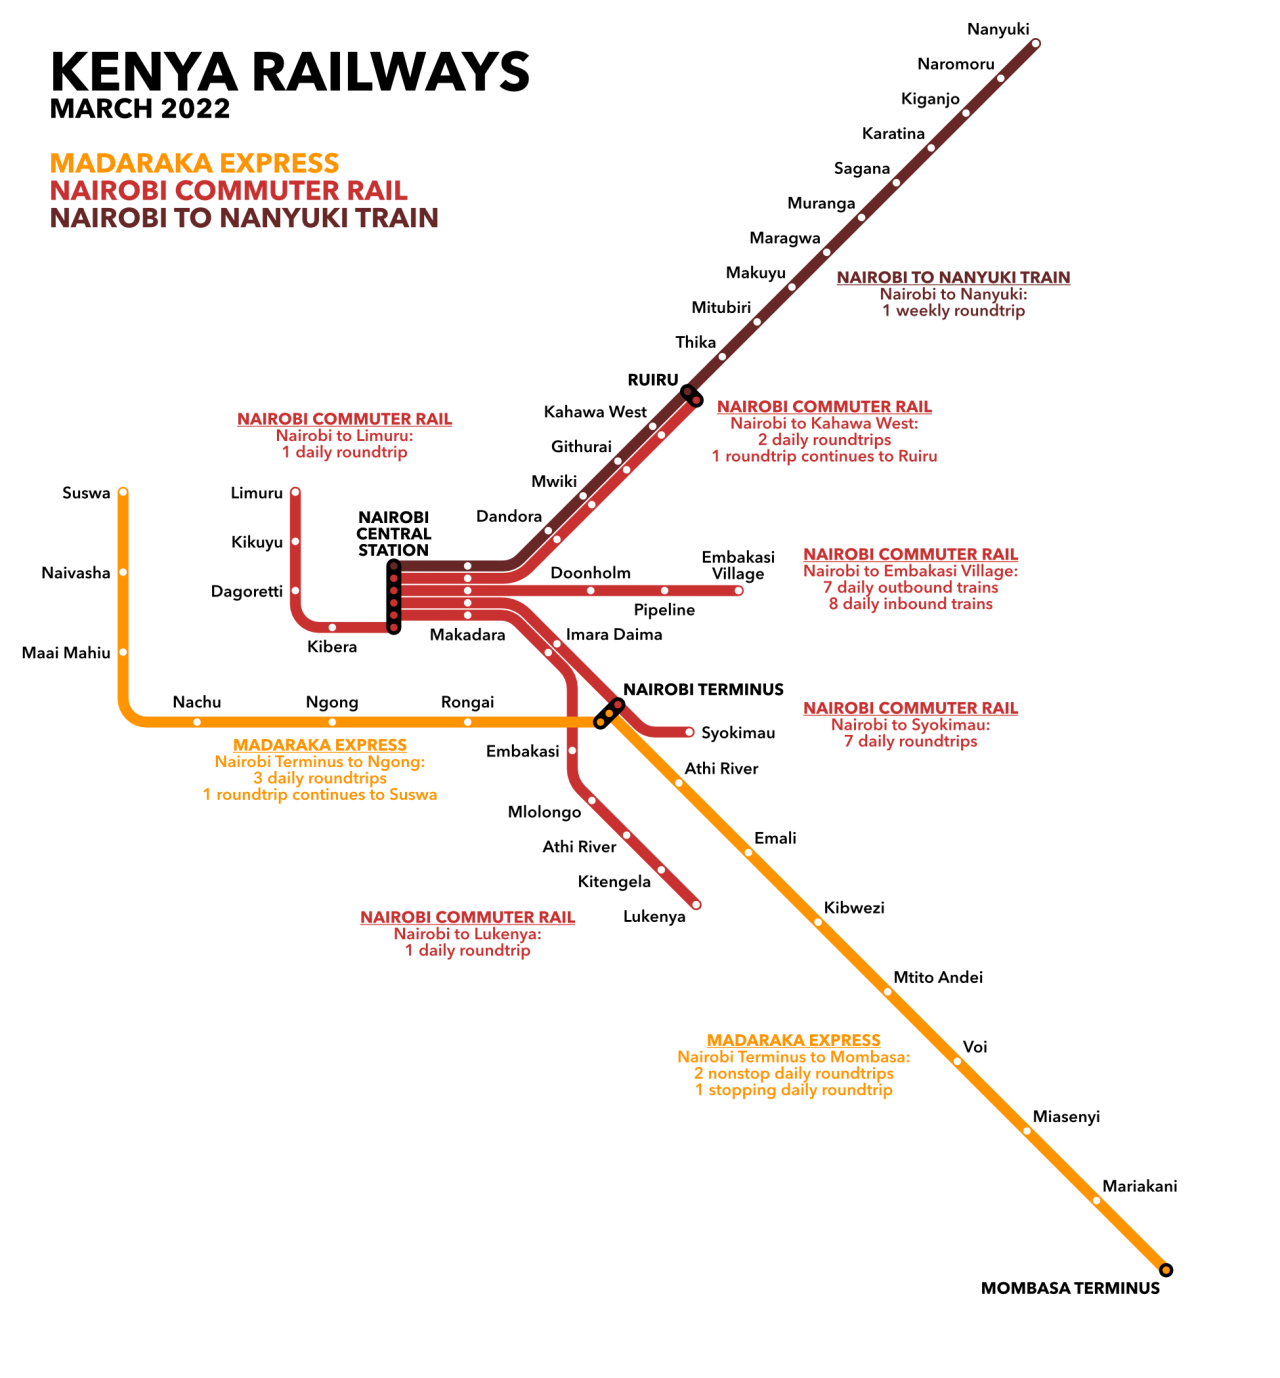 Kenya Railways System MapKenya’s rail system is pretty dang interesting, and is also a great illustration of how important track gauge can be. Nairobi’s commuter rail network runs on the historic meter-gauge lines, as does the Nairobi to Nanyuki...